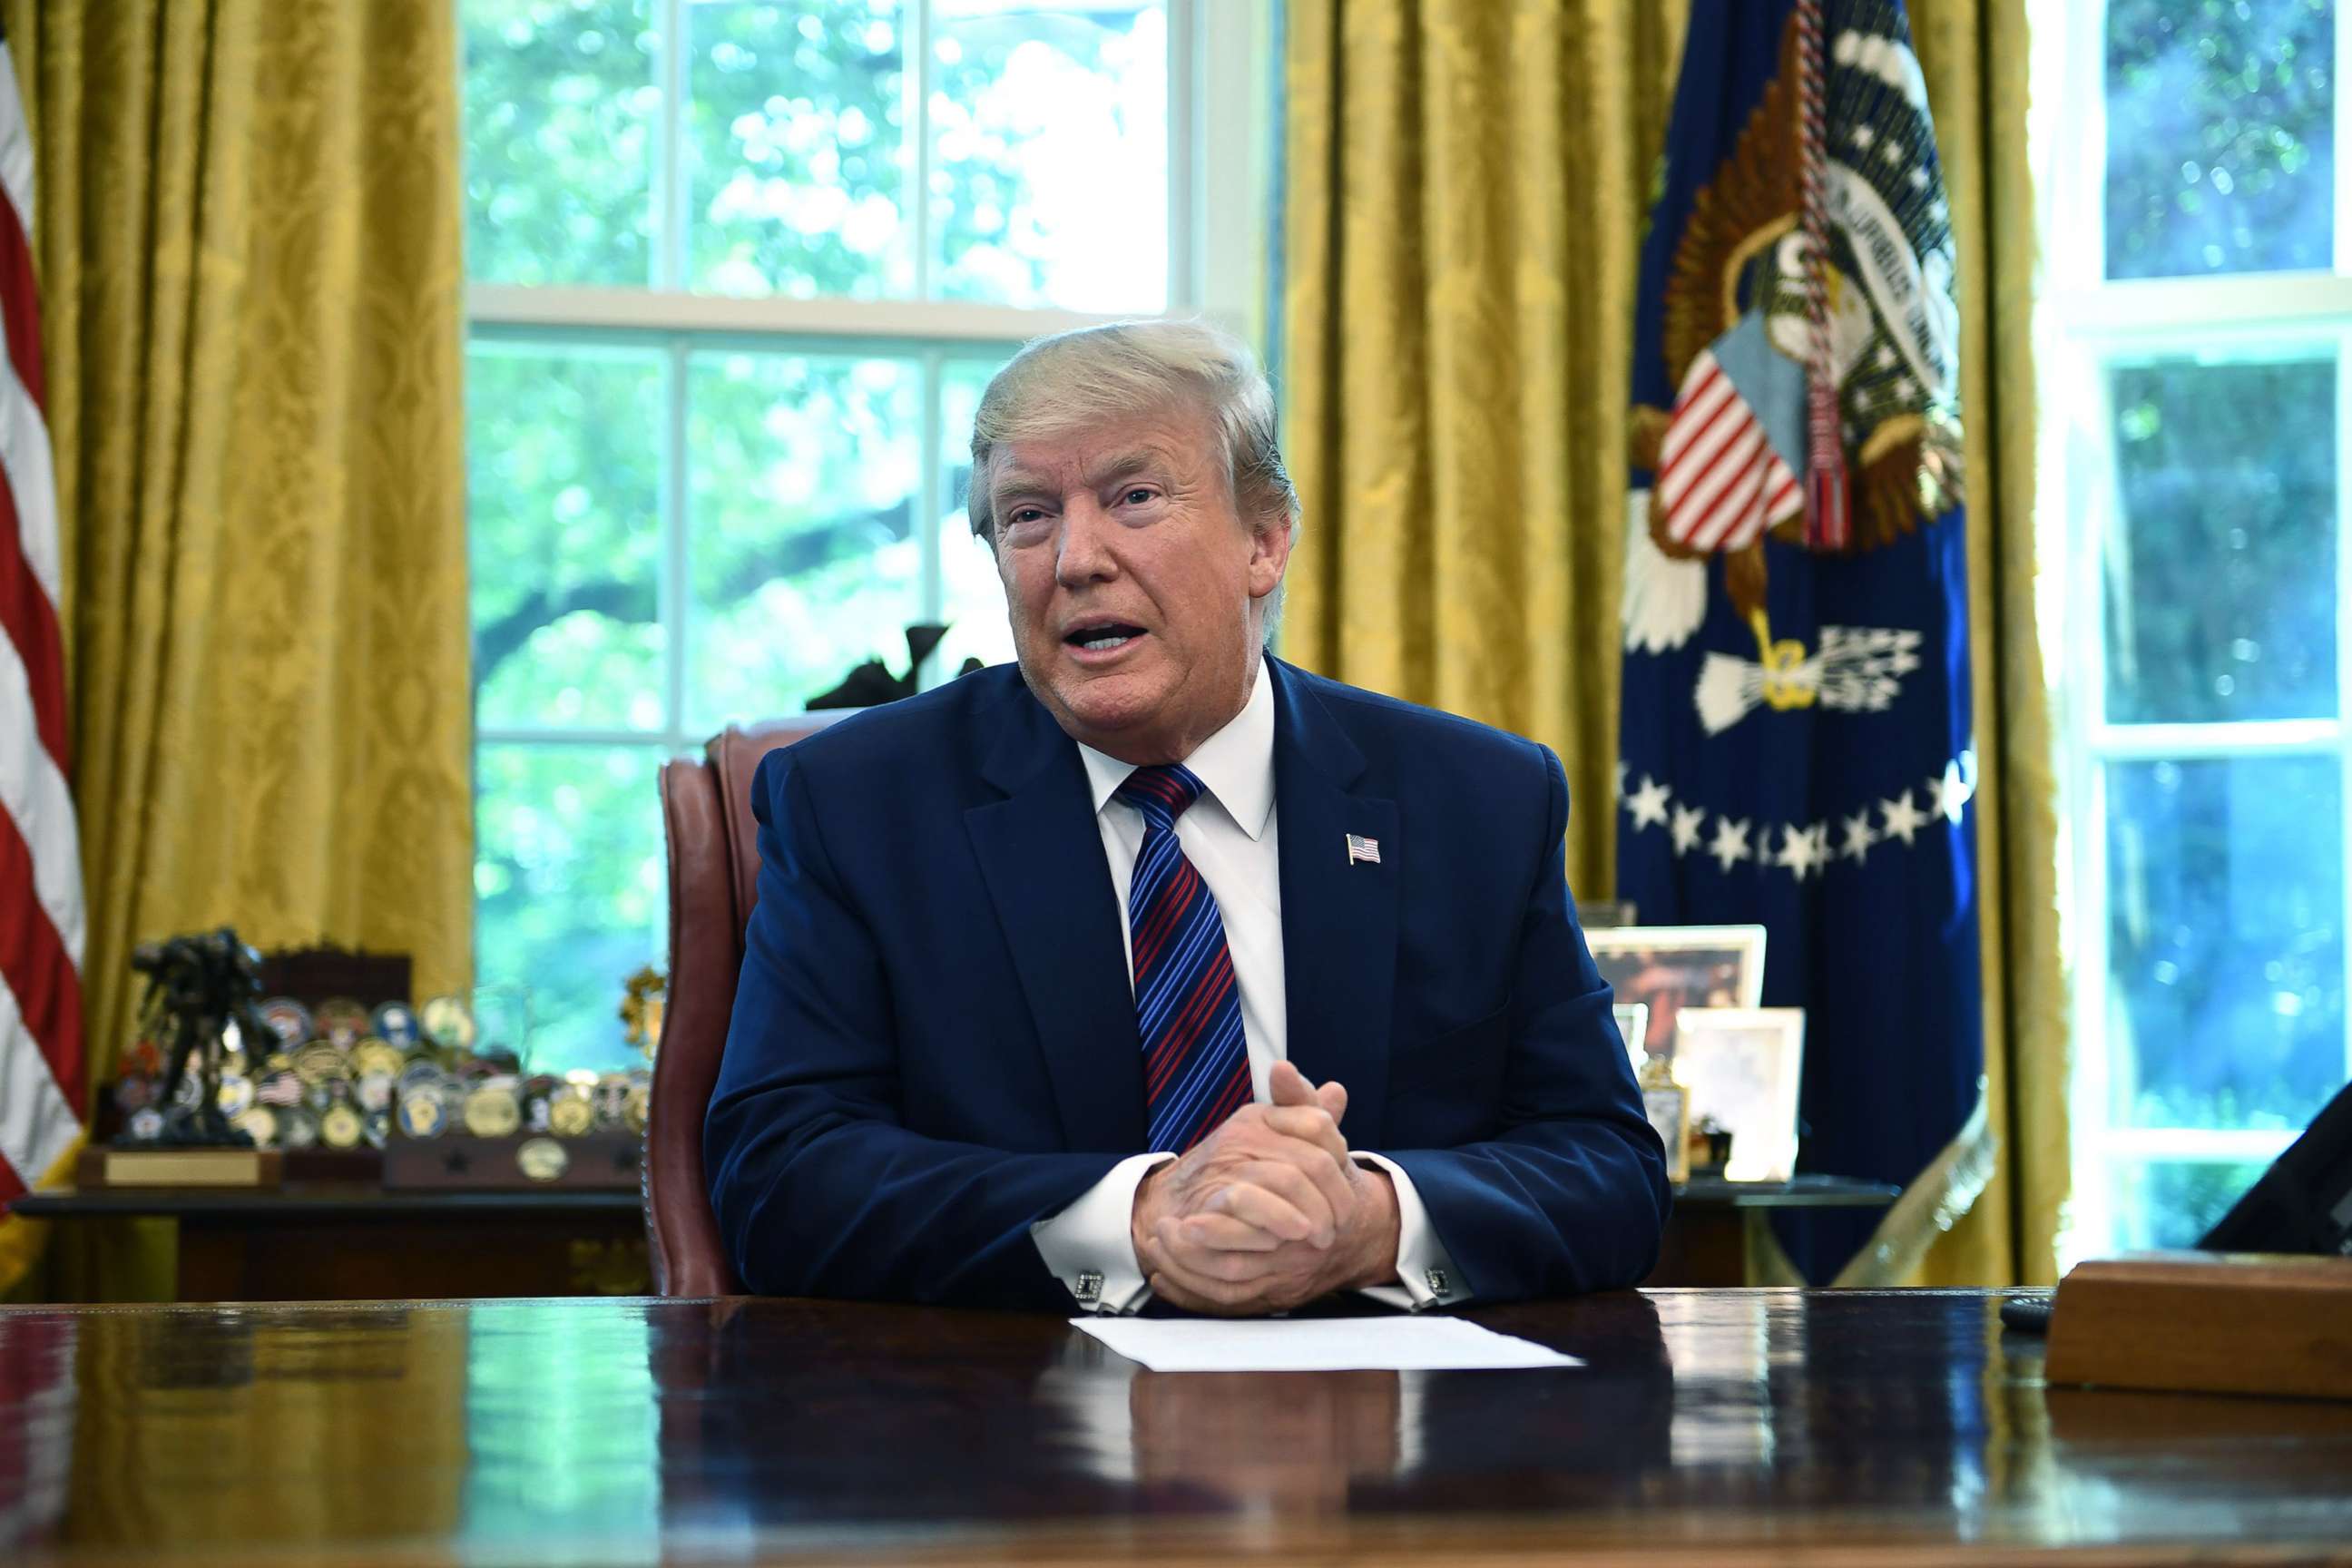 PHOTO: President Donald Trump speaks to the media in the Oval Office of the White House, July 26, 2019.